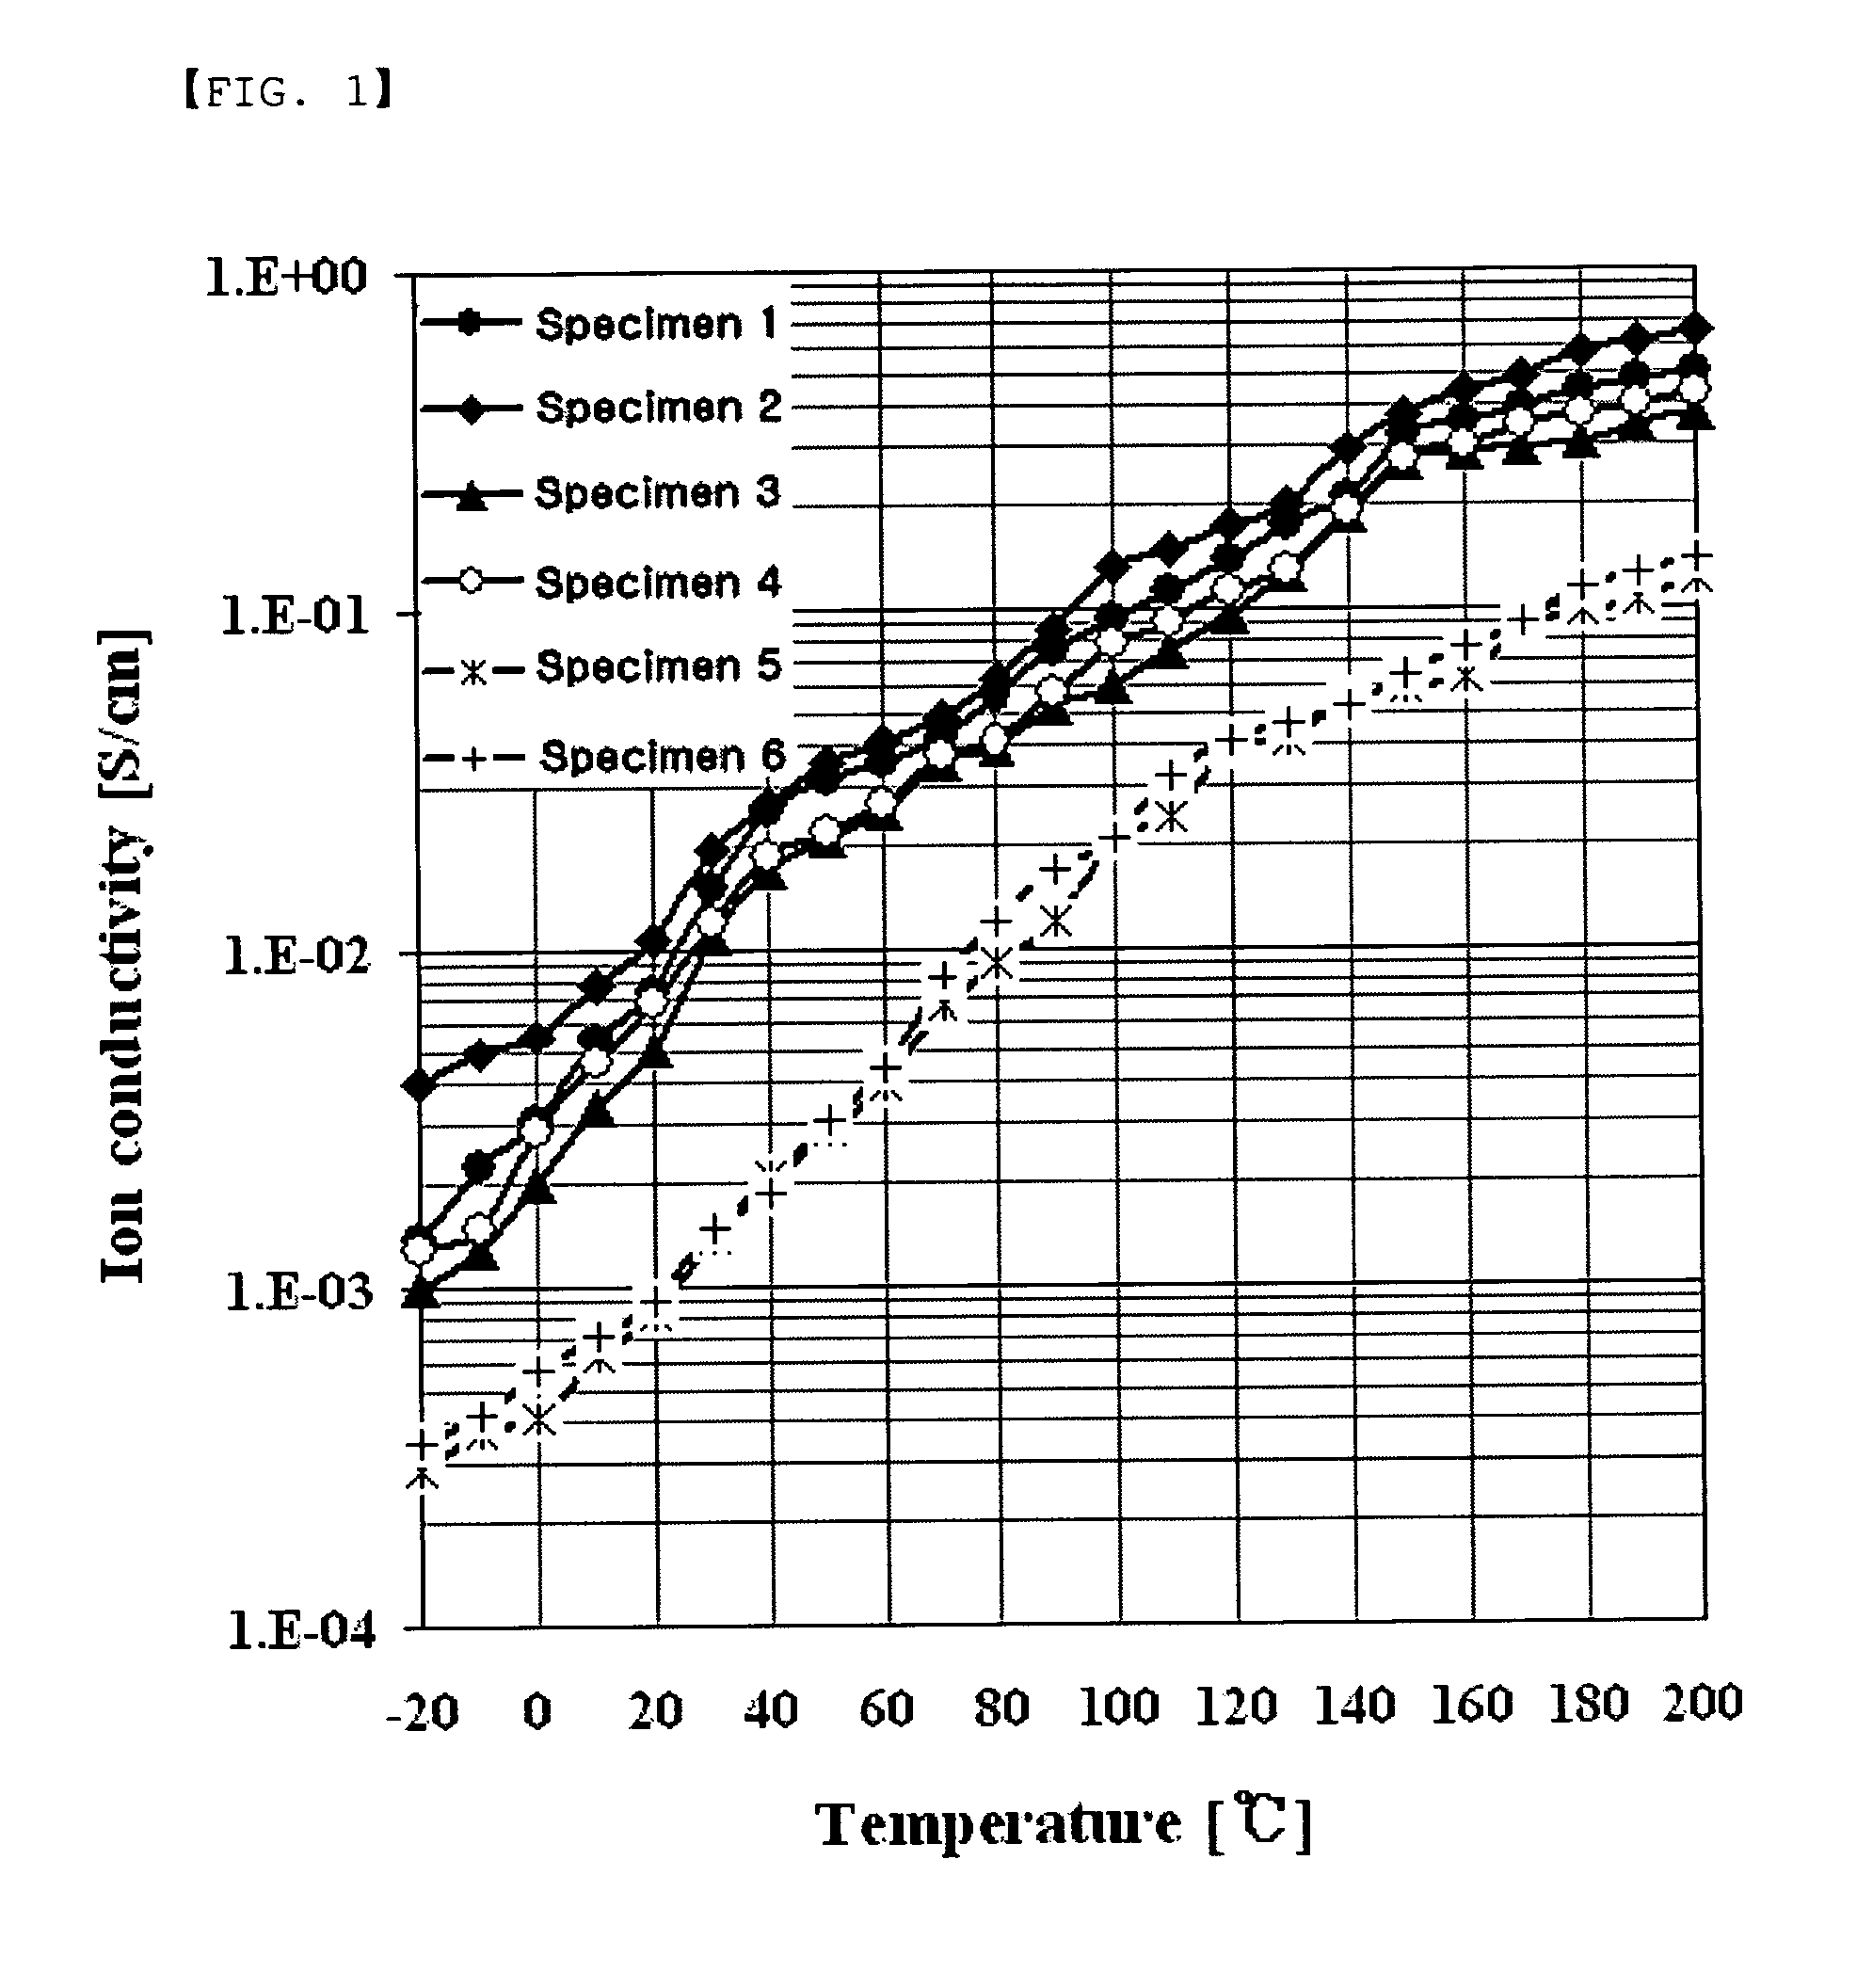 Branched multiblock polybenzimidazole-benzamide copolymer and method for preparing the same, electrolyte membrane and paste/gel prepared therefrom